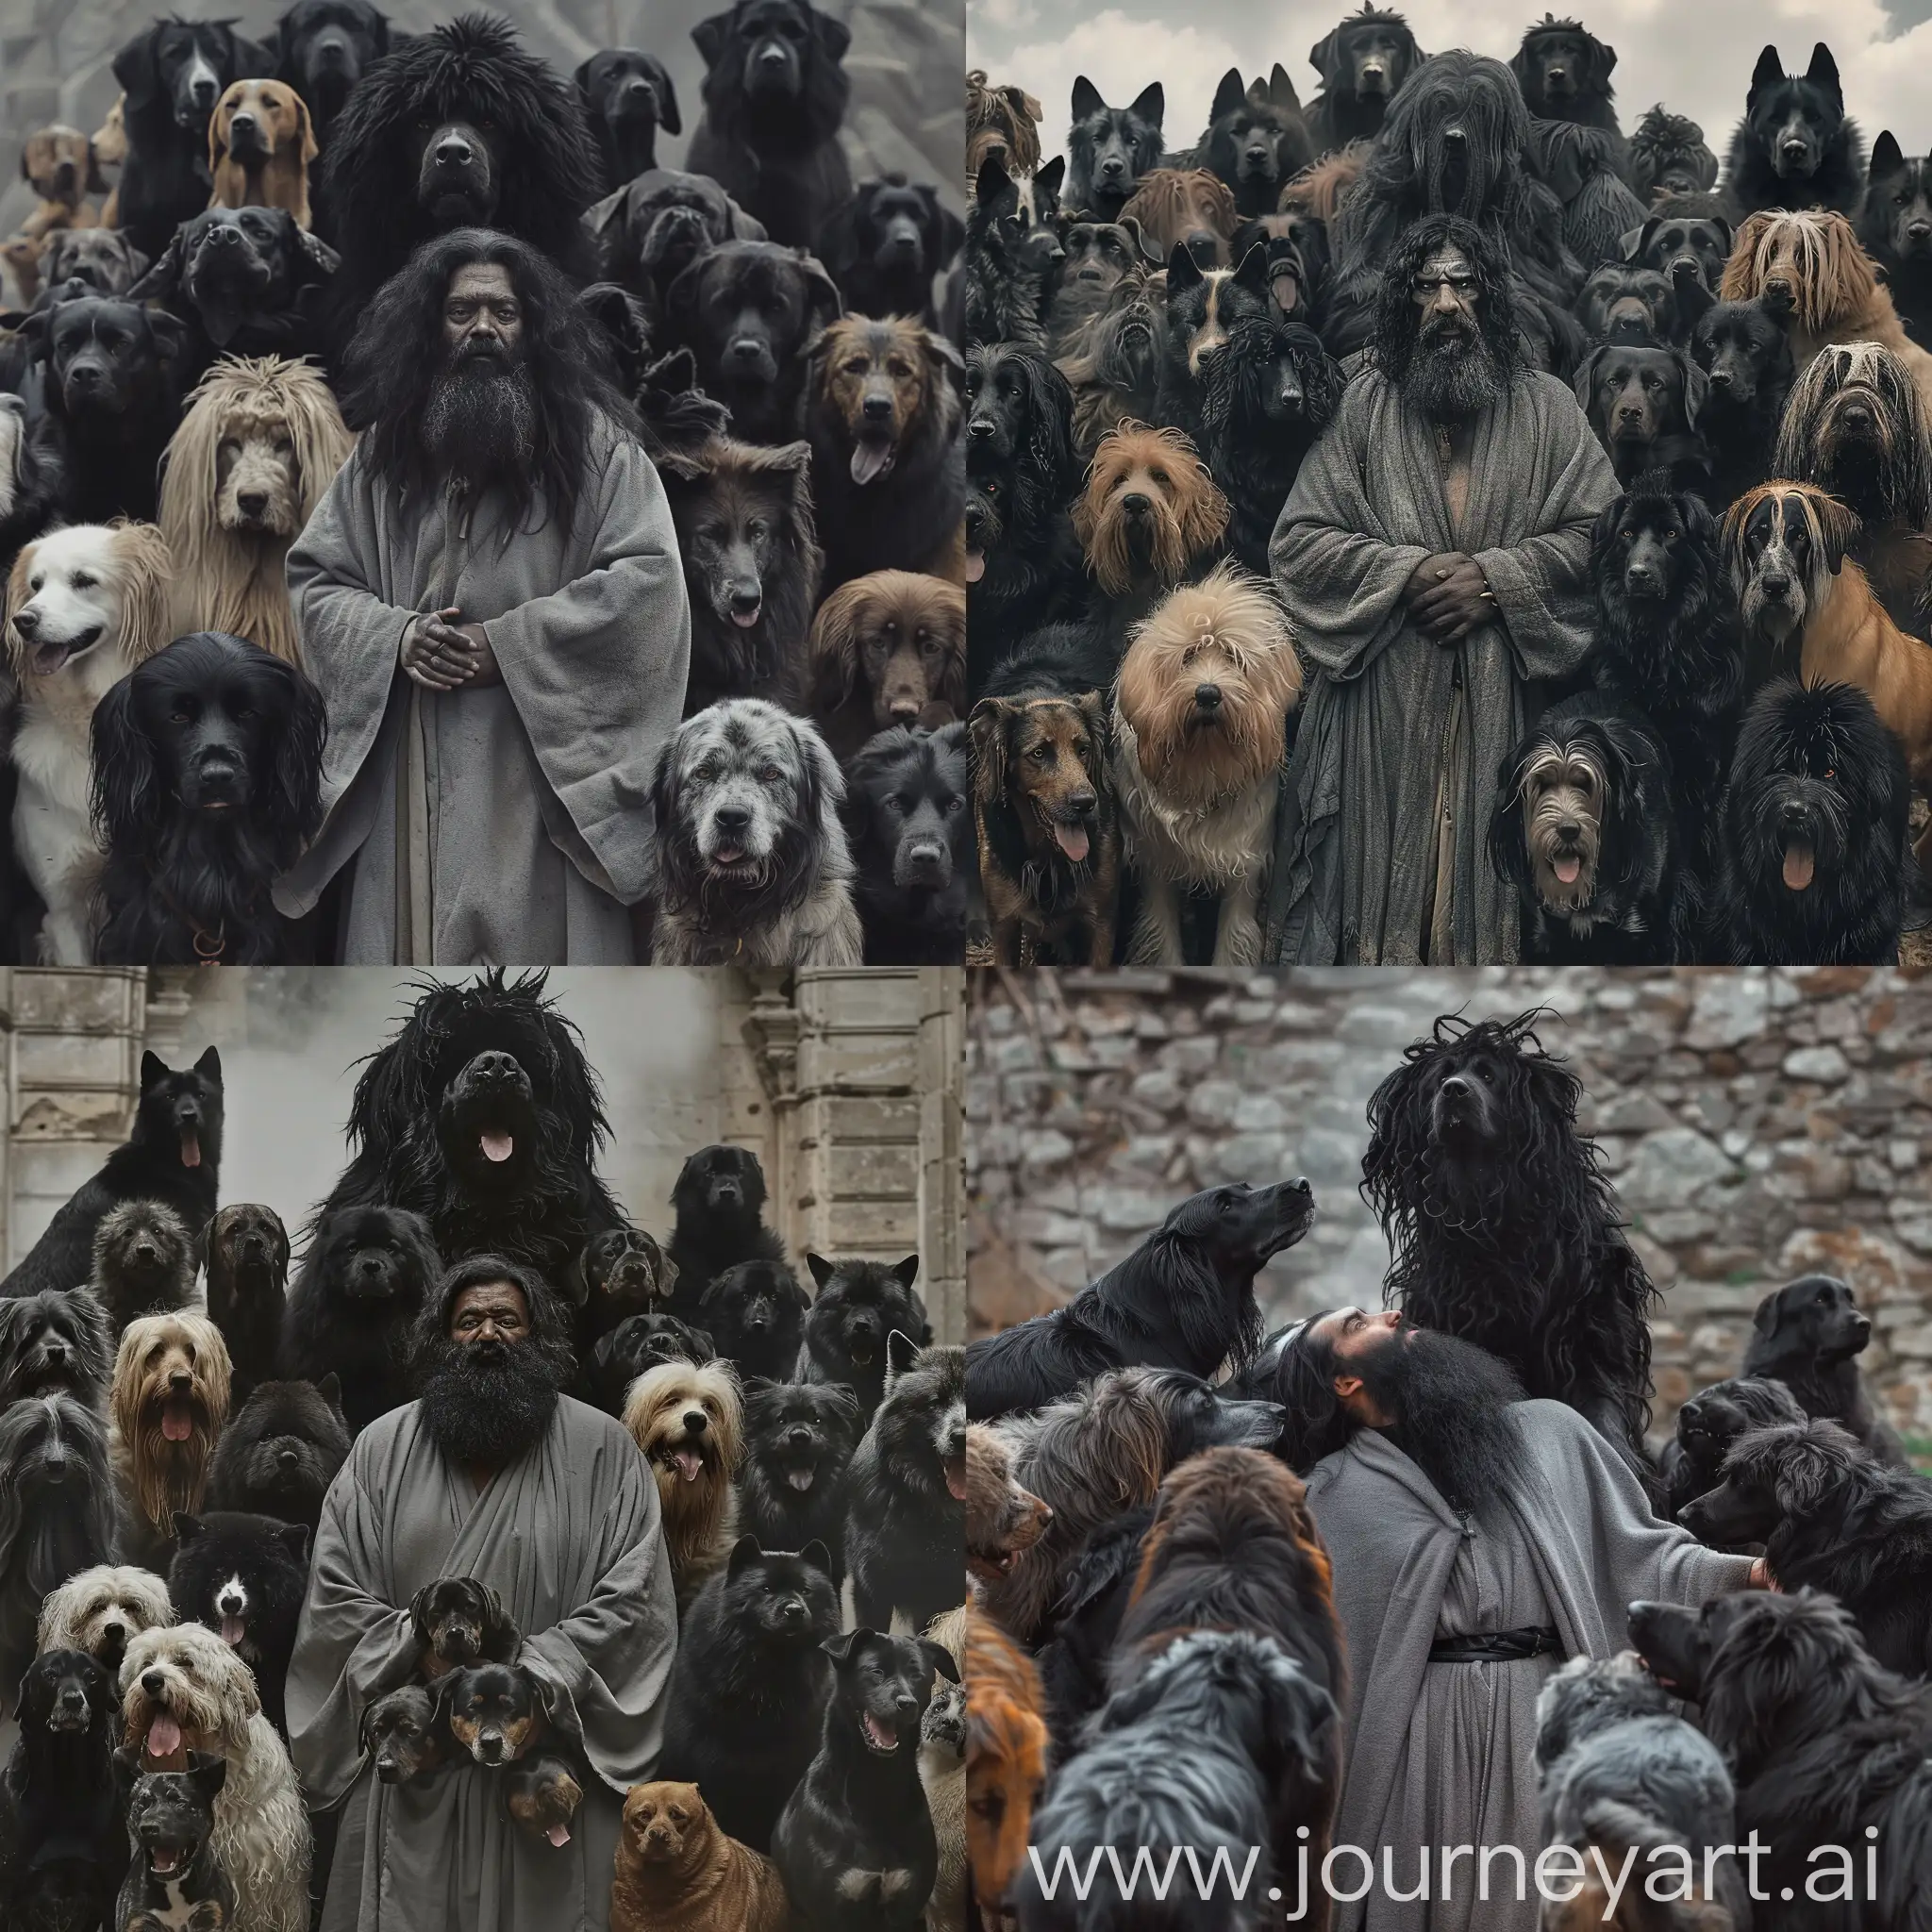 Tall-Bearded-Man-in-Gray-Robe-Leading-Pack-of-Diverse-Wild-Dogs